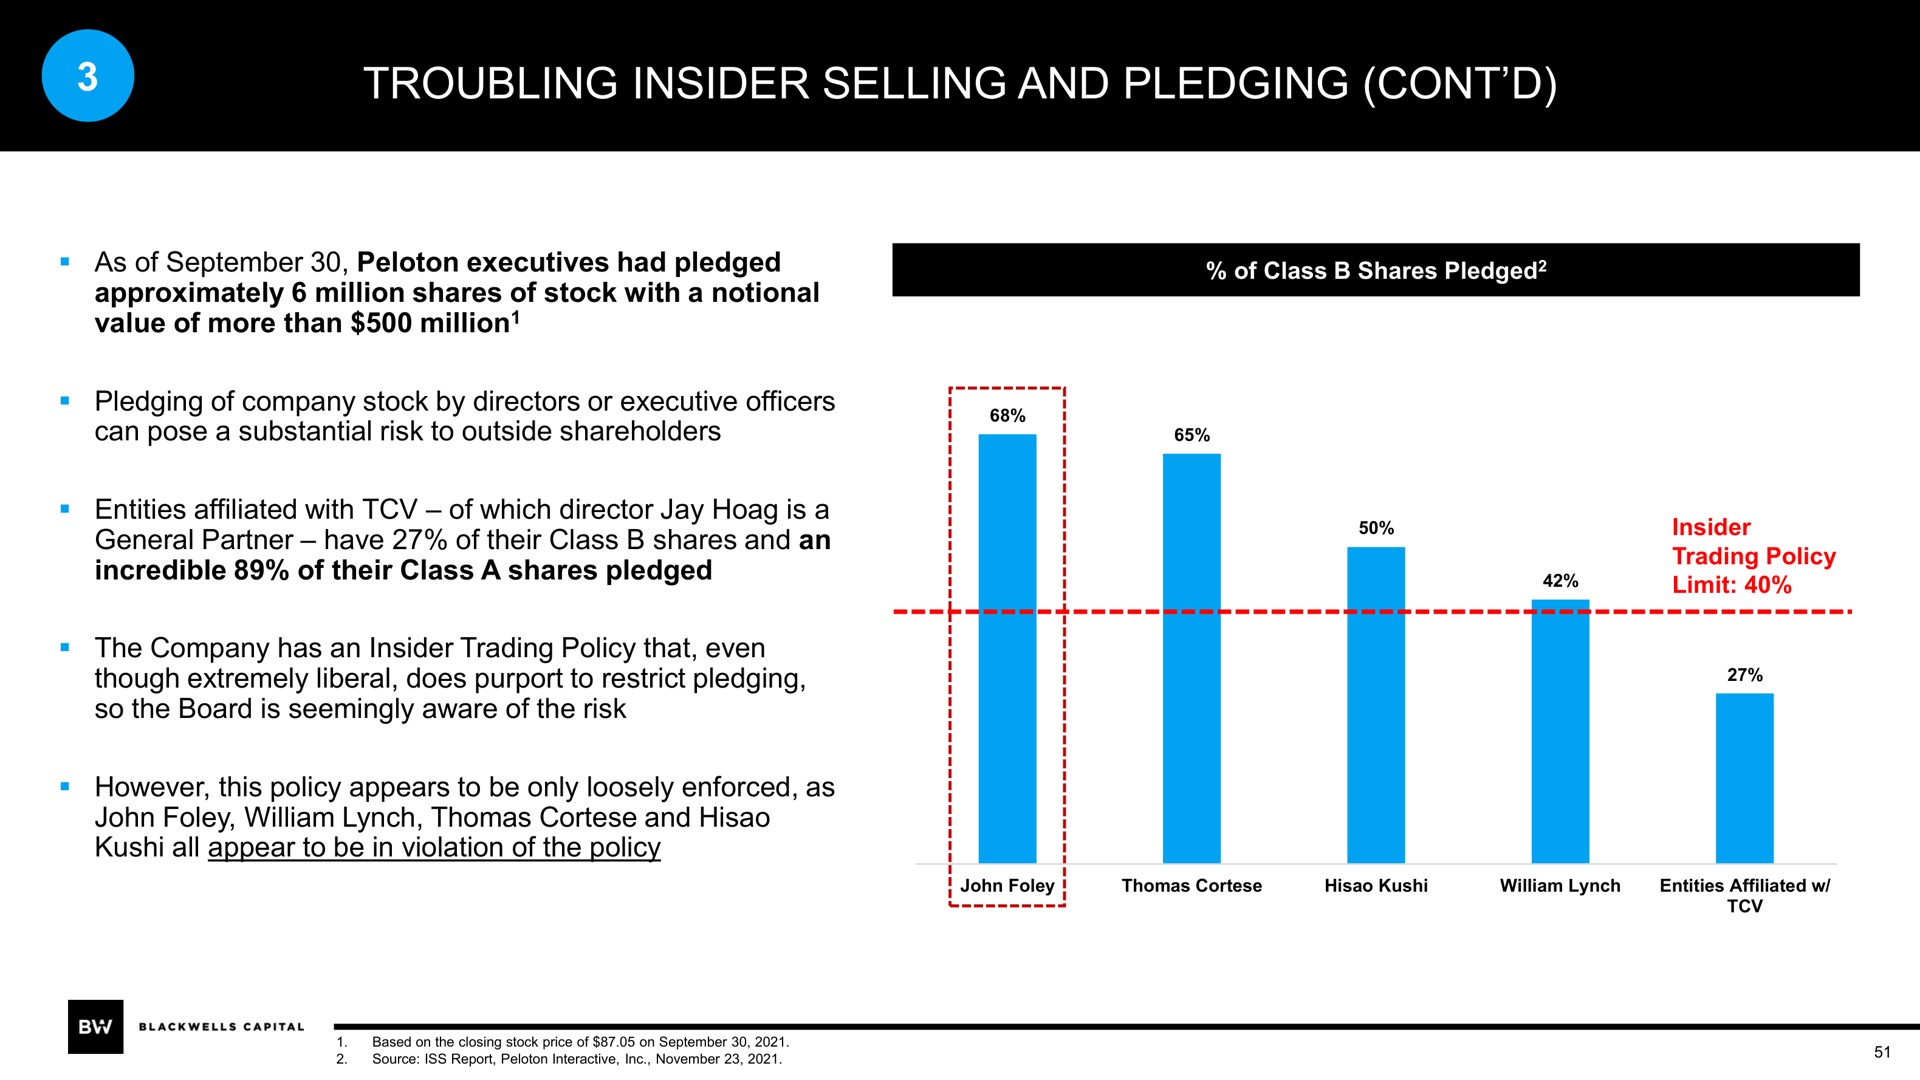 troubling insider selling and pledging | Blackwells Capital